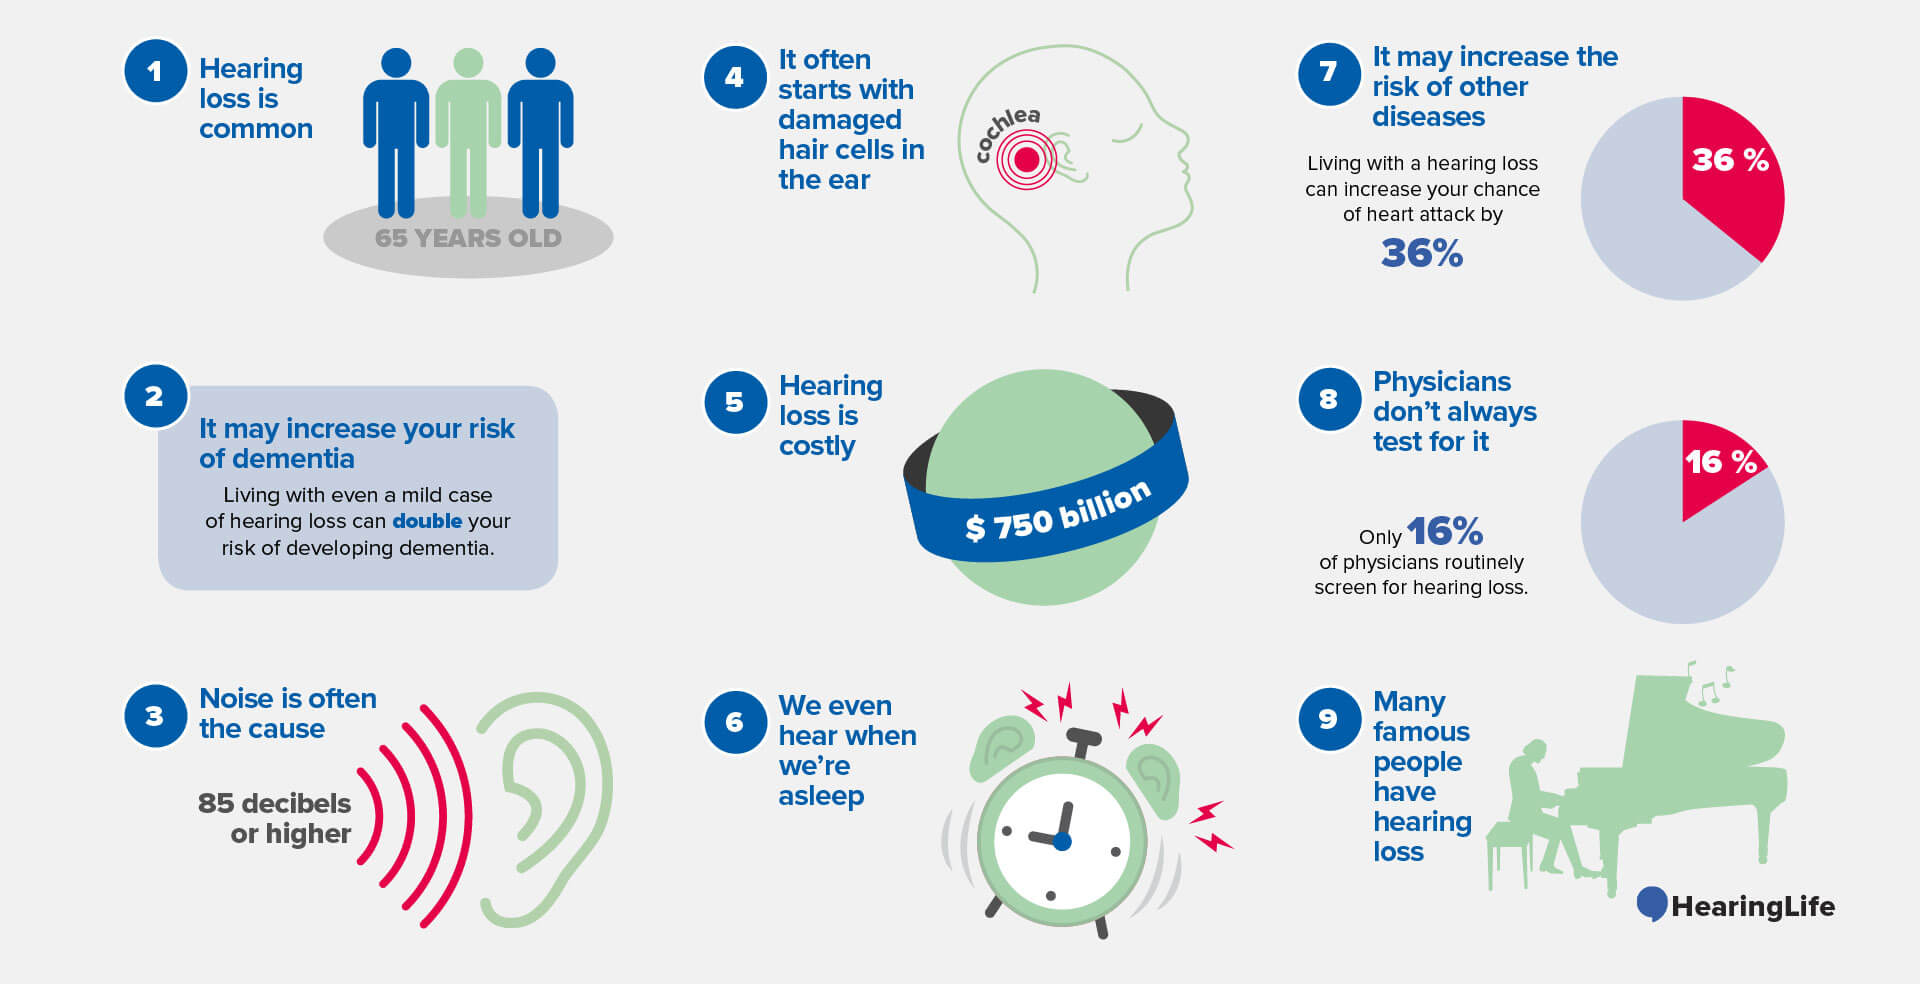 Image show illustration of 9 facts of hearing loss